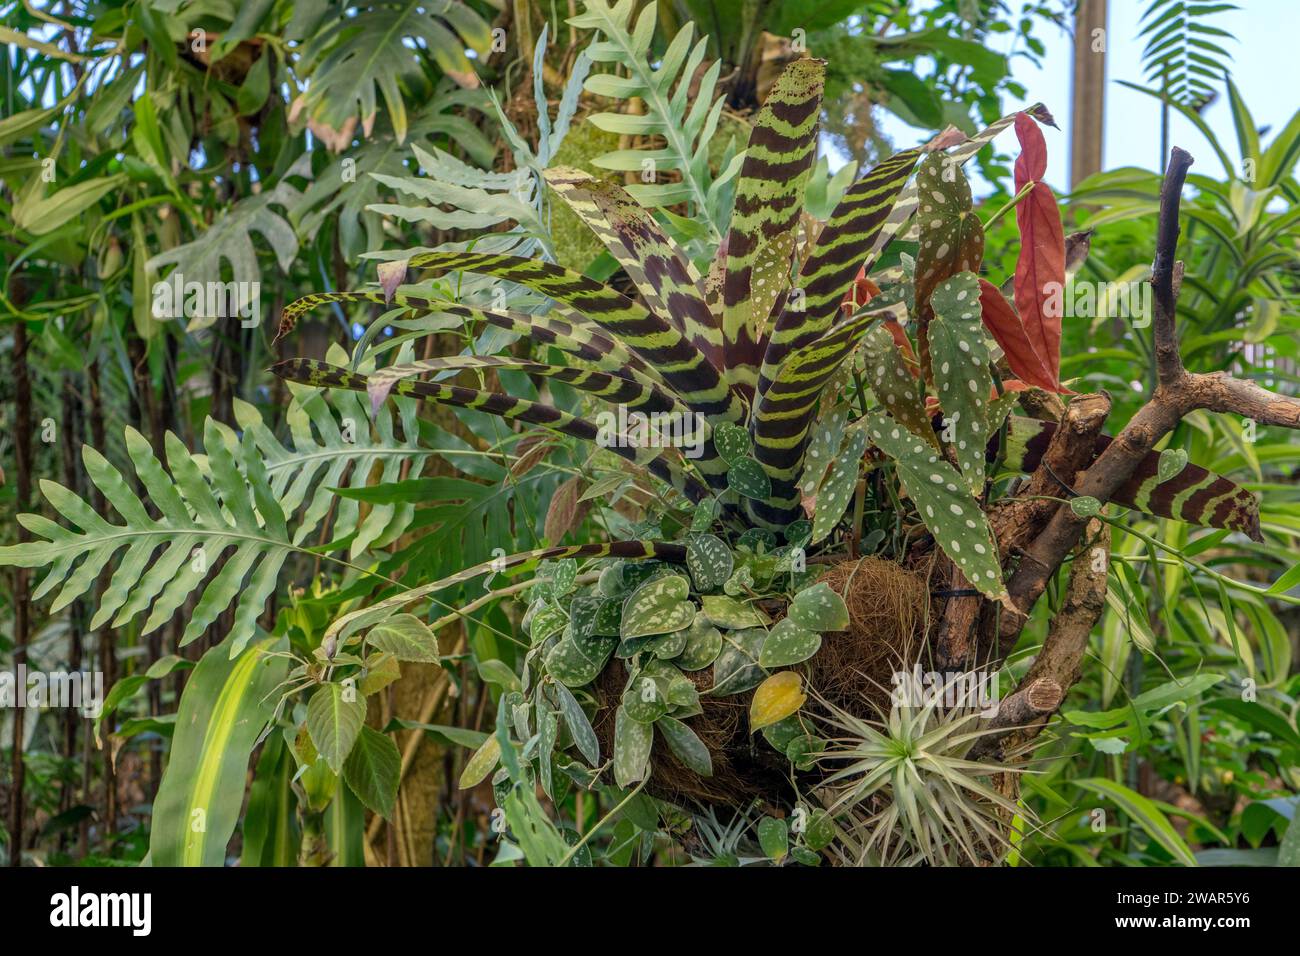 Detail shot with tropical plants Window Leaf Monstera, Flaming Sword Vriesea splendens, Spotted Ivy, Scindapsus pictus and Trout Begonia Begonia macul Stock Photo